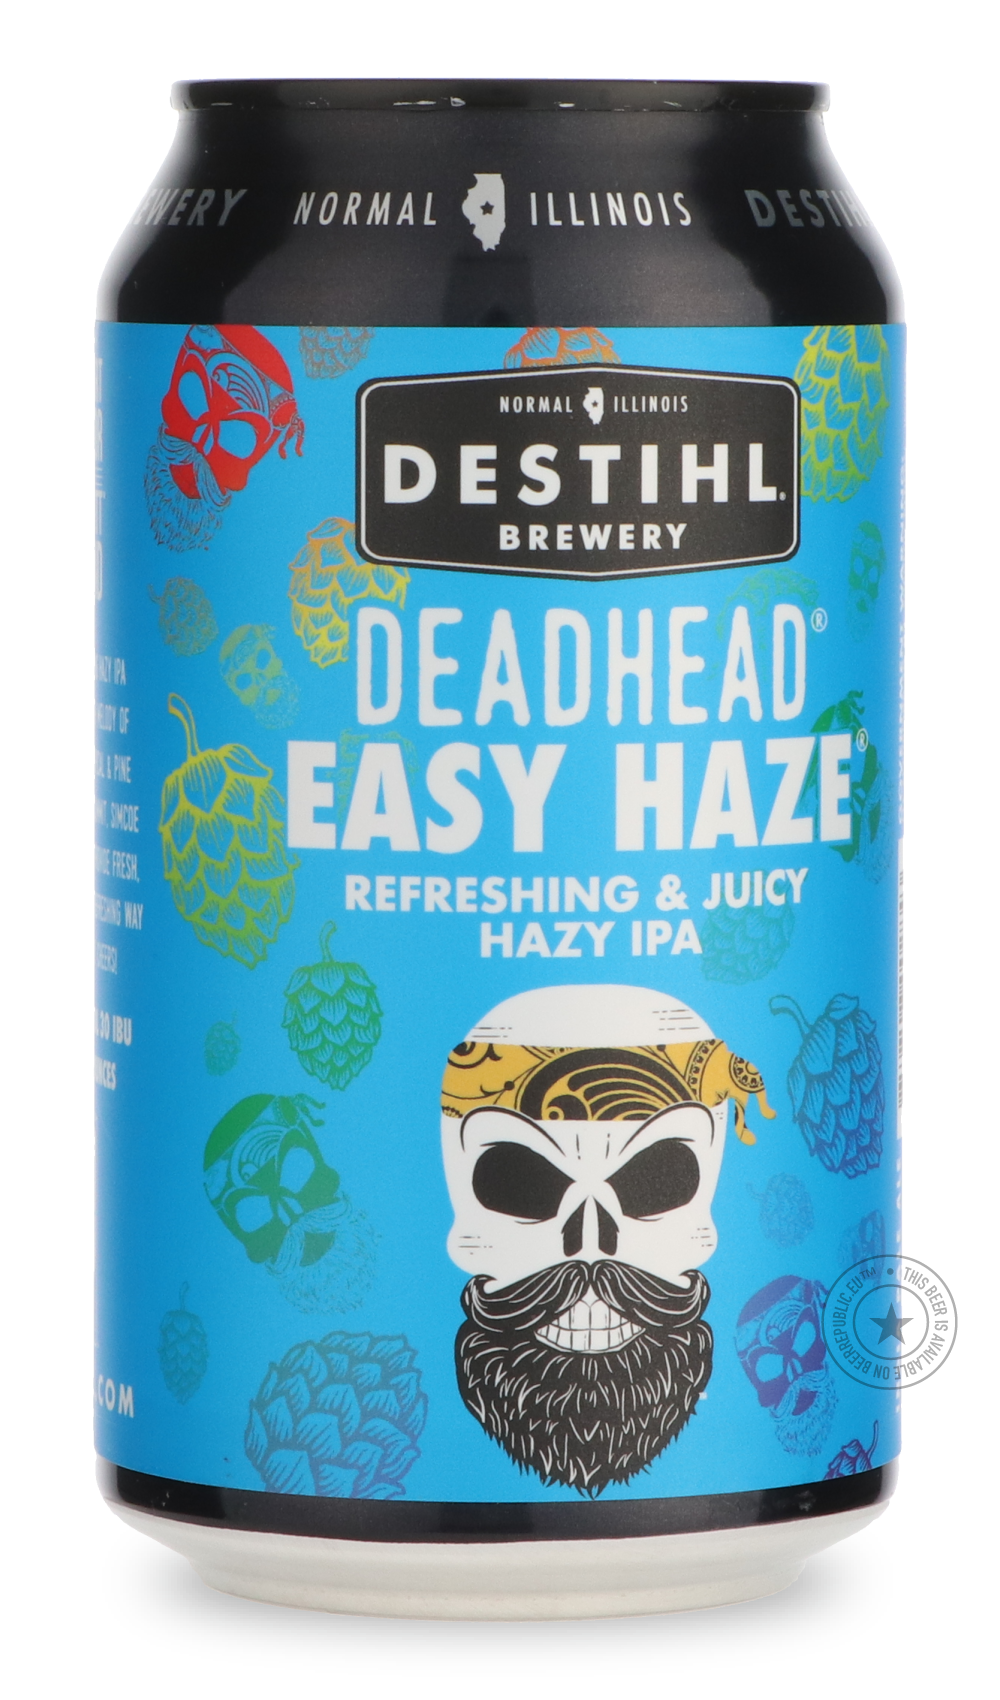 -Destihl- Deadhead Easy Haze-IPA- Only @ Beer Republic - The best online beer store for American & Canadian craft beer - Buy beer online from the USA and Canada - Bier online kopen - Amerikaans bier kopen - Craft beer store - Craft beer kopen - Amerikanisch bier kaufen - Bier online kaufen - Acheter biere online - IPA - Stout - Porter - New England IPA - Hazy IPA - Imperial Stout - Barrel Aged - Barrel Aged Imperial Stout - Brown - Dark beer - Blond - Blonde - Pilsner - Lager - Wheat - Weizen - Amber - Barl